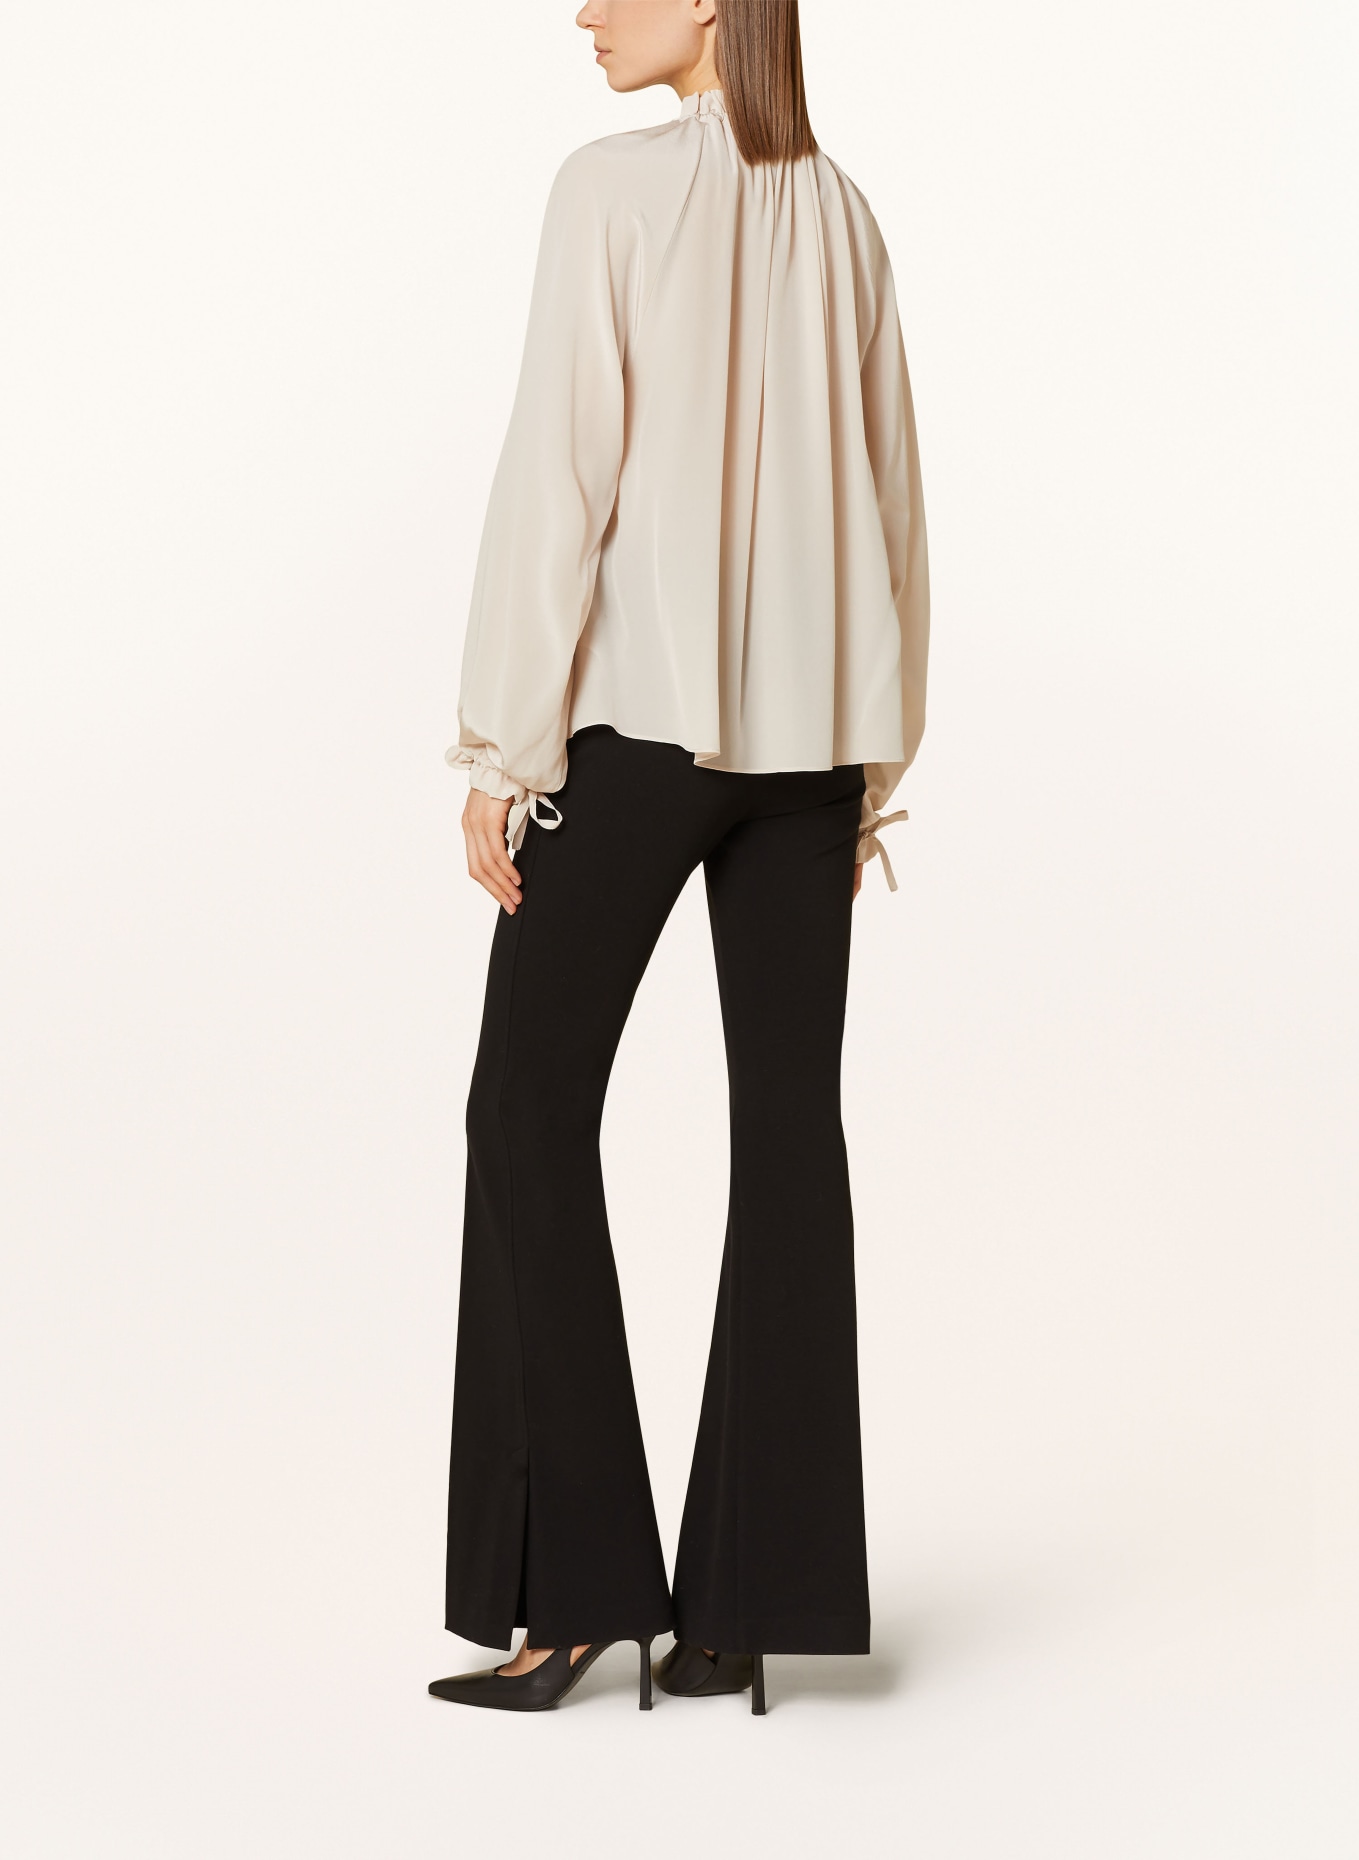 SLY 010 Bow-tie blouse GLENN in silk, Color: CREAM (Image 3)